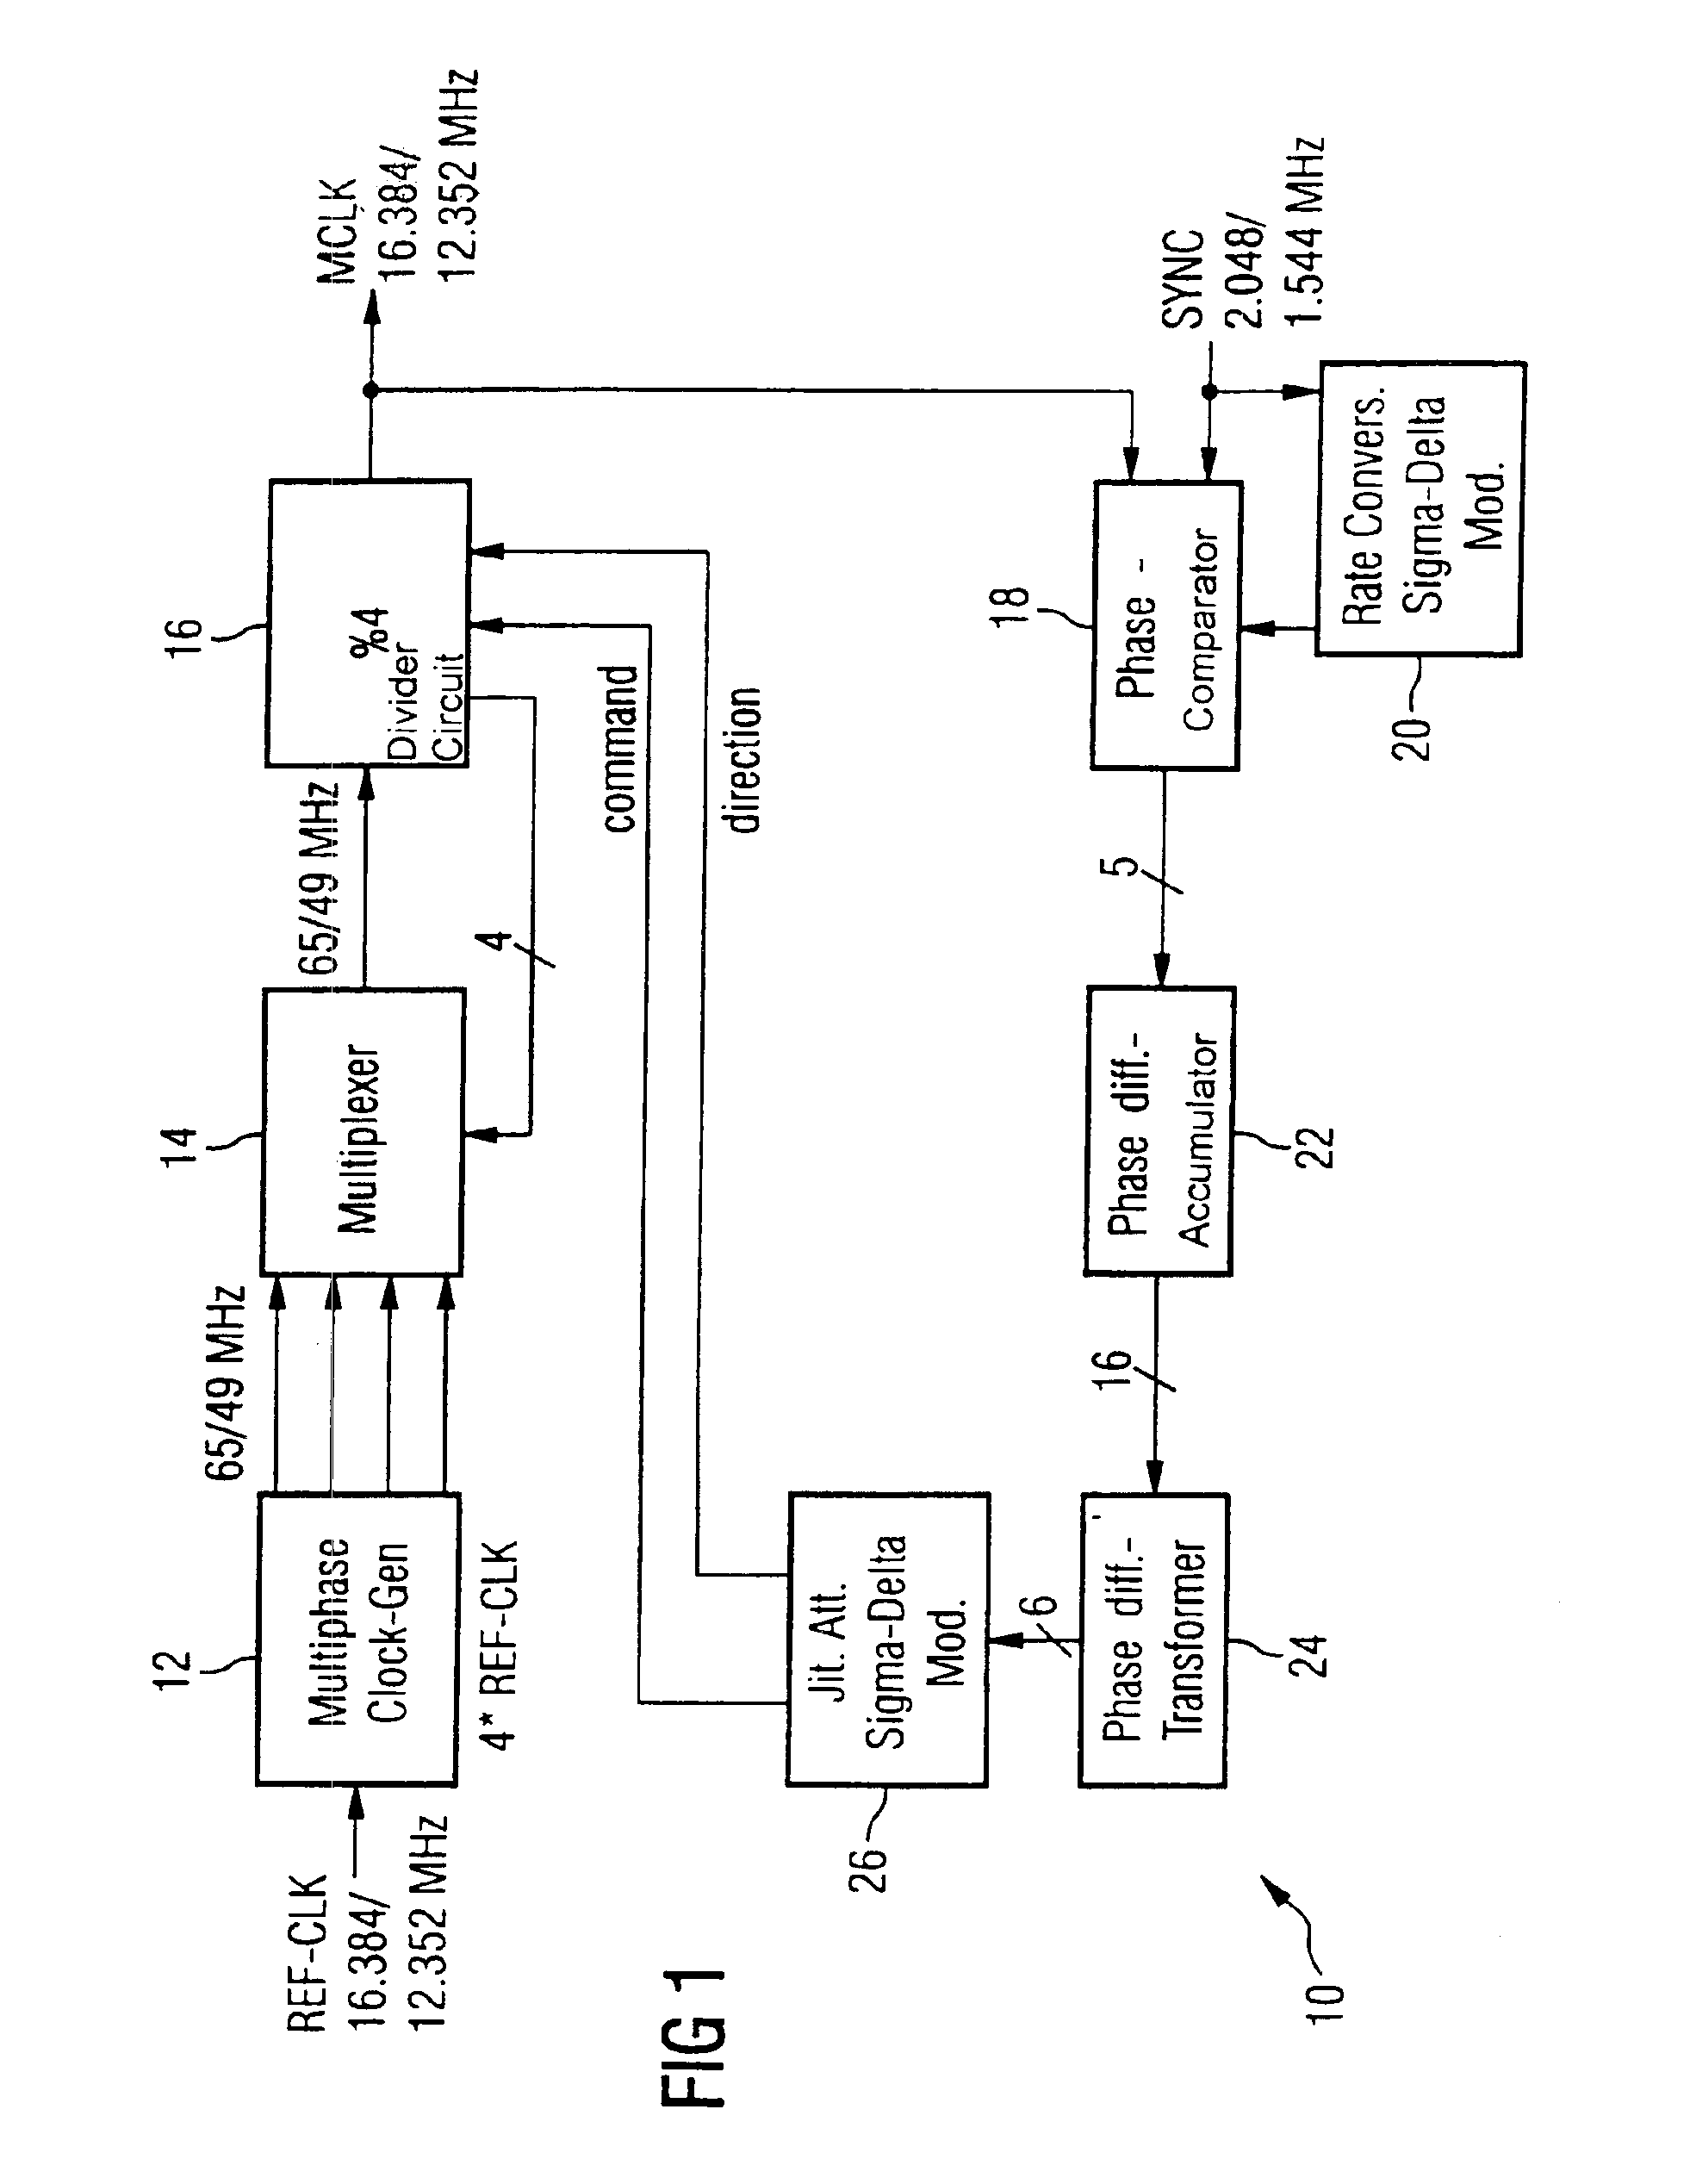 Digitally controlled circuit for reducing the phase modulation of a signal